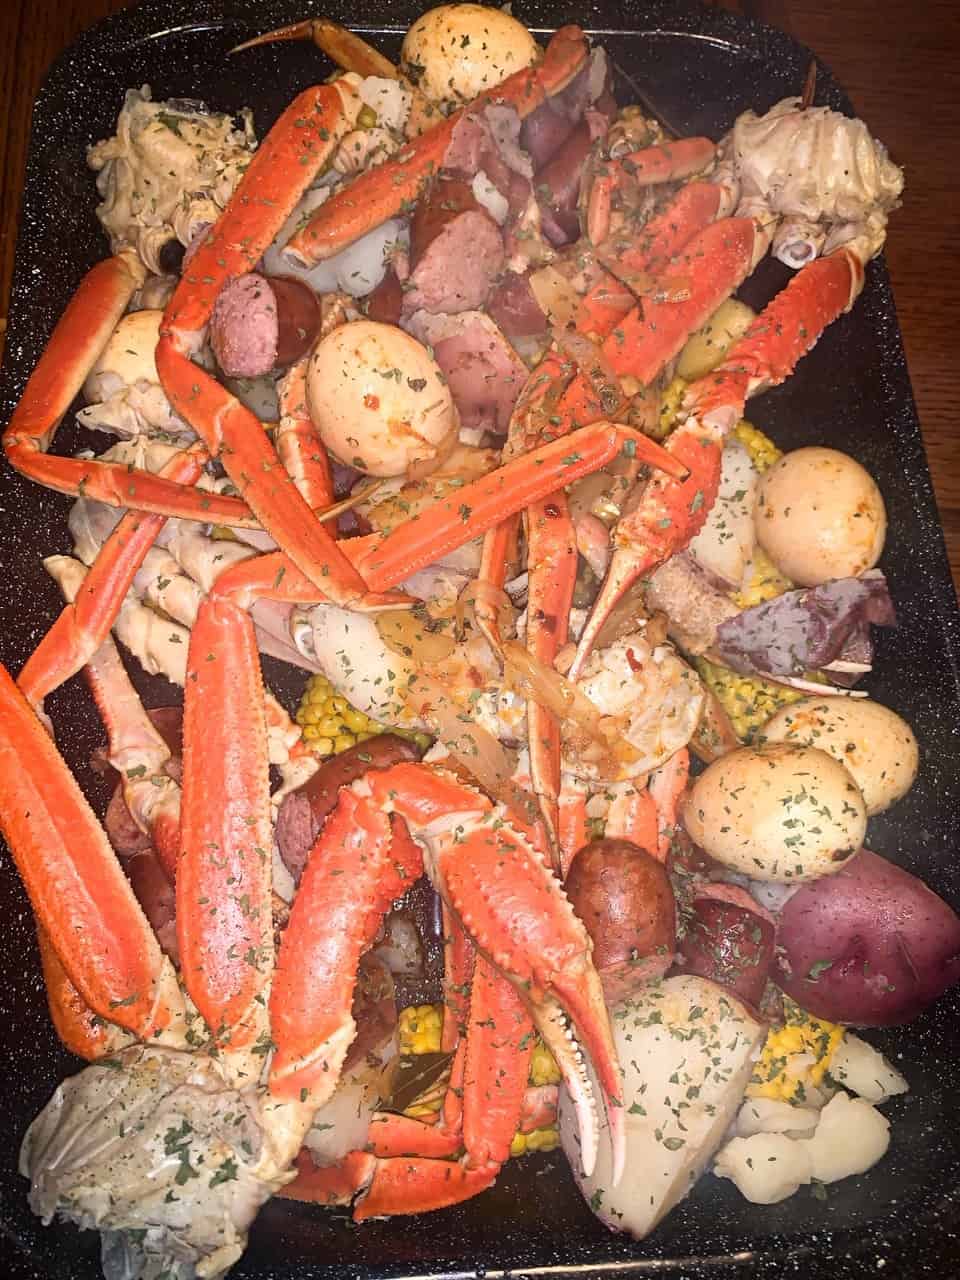 Garlic Butter Seafood Boil Razzle Dazzle Life Serve with chicken or vegetable skewers for a starter or party nibble. garlic butter seafood boil